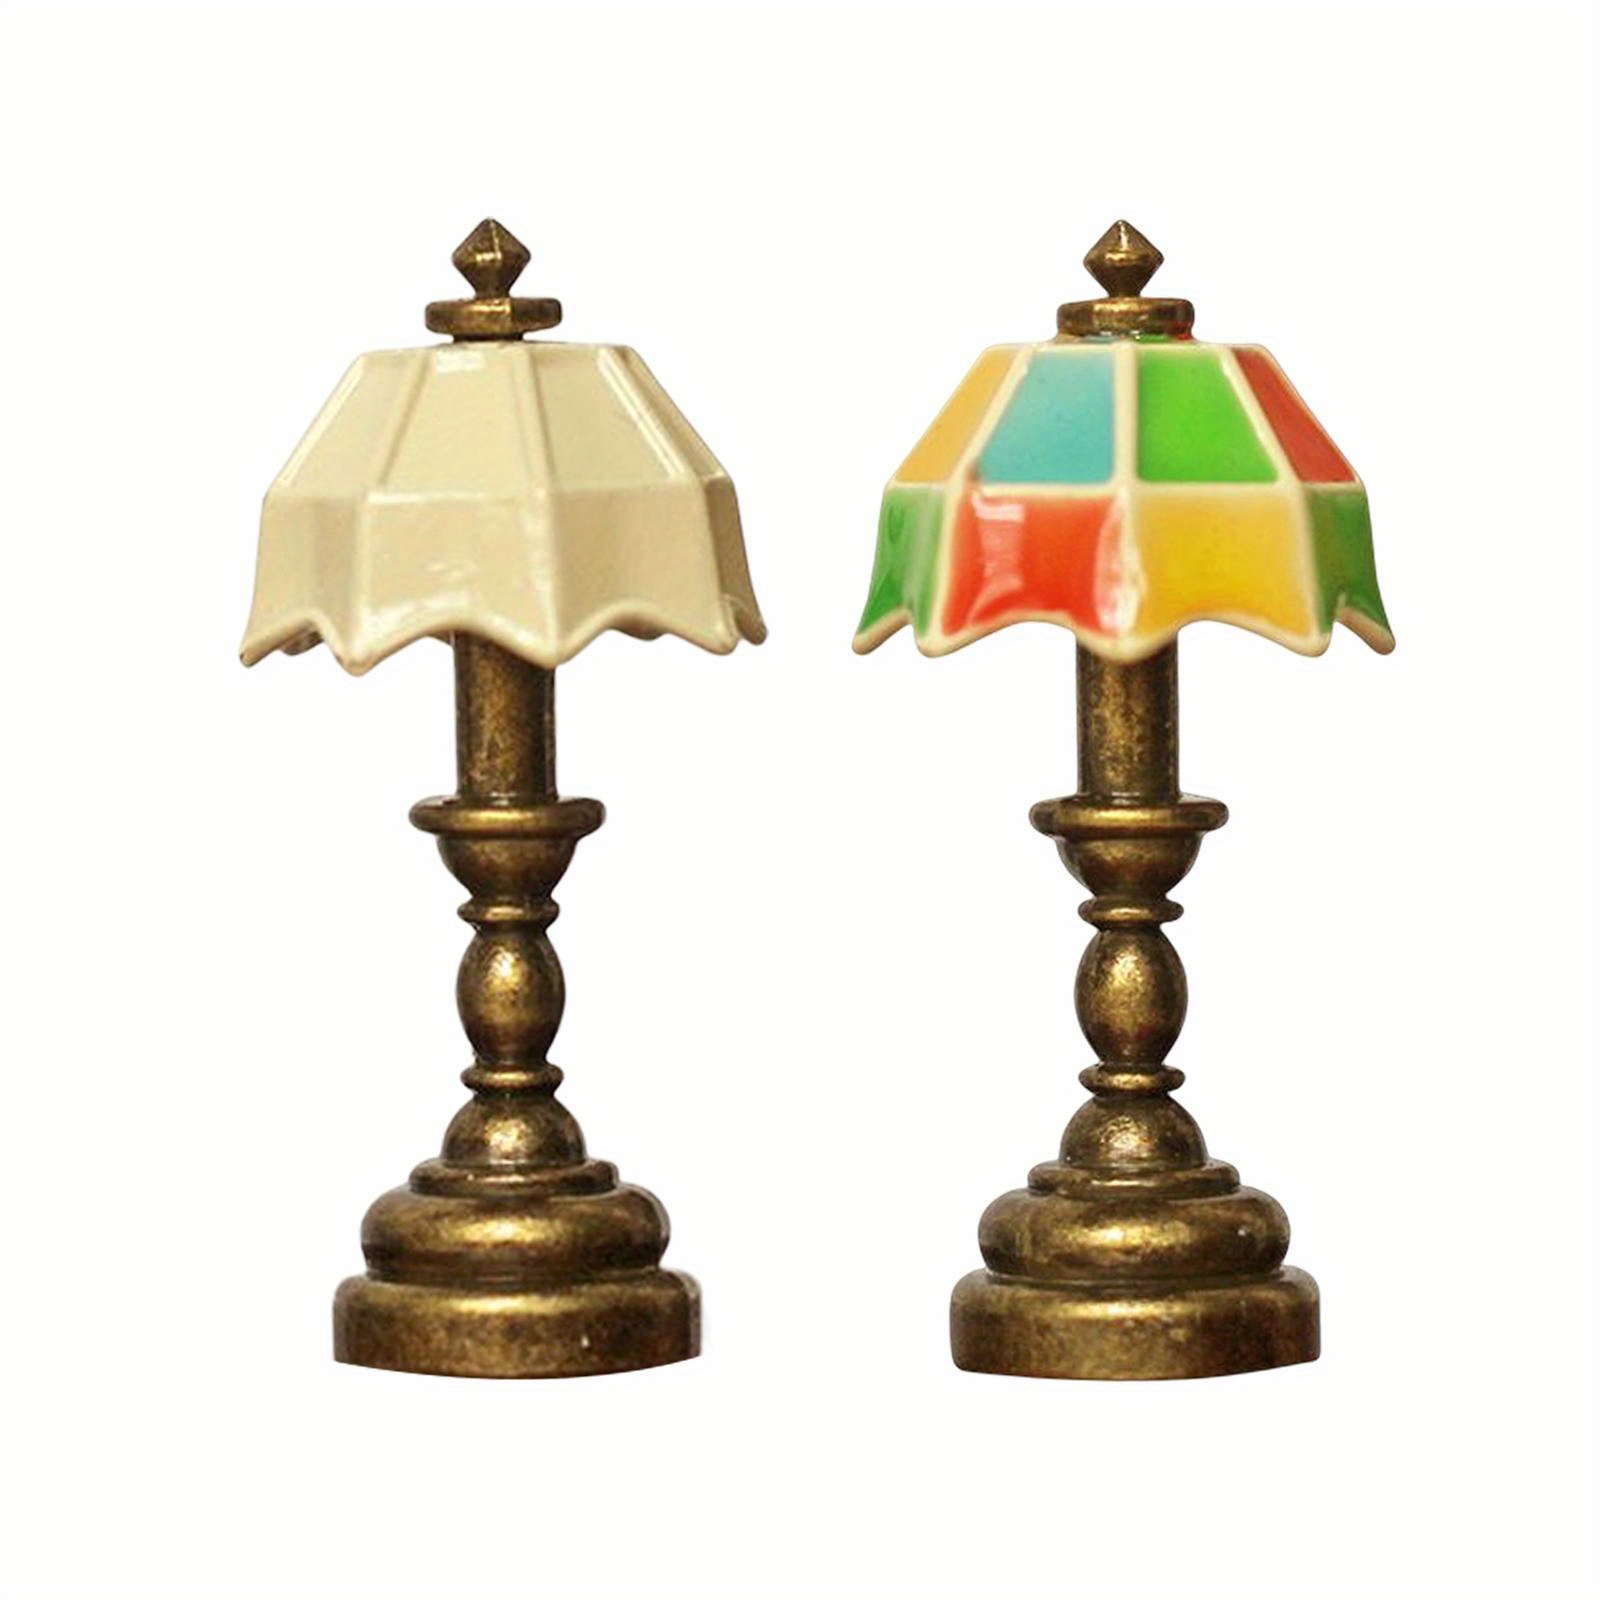 

1:12 Scale Dollhouse Table Lamp Mini Alloy Table Lights For Ornament Diy Projects Life Scene Bedroom Accessory